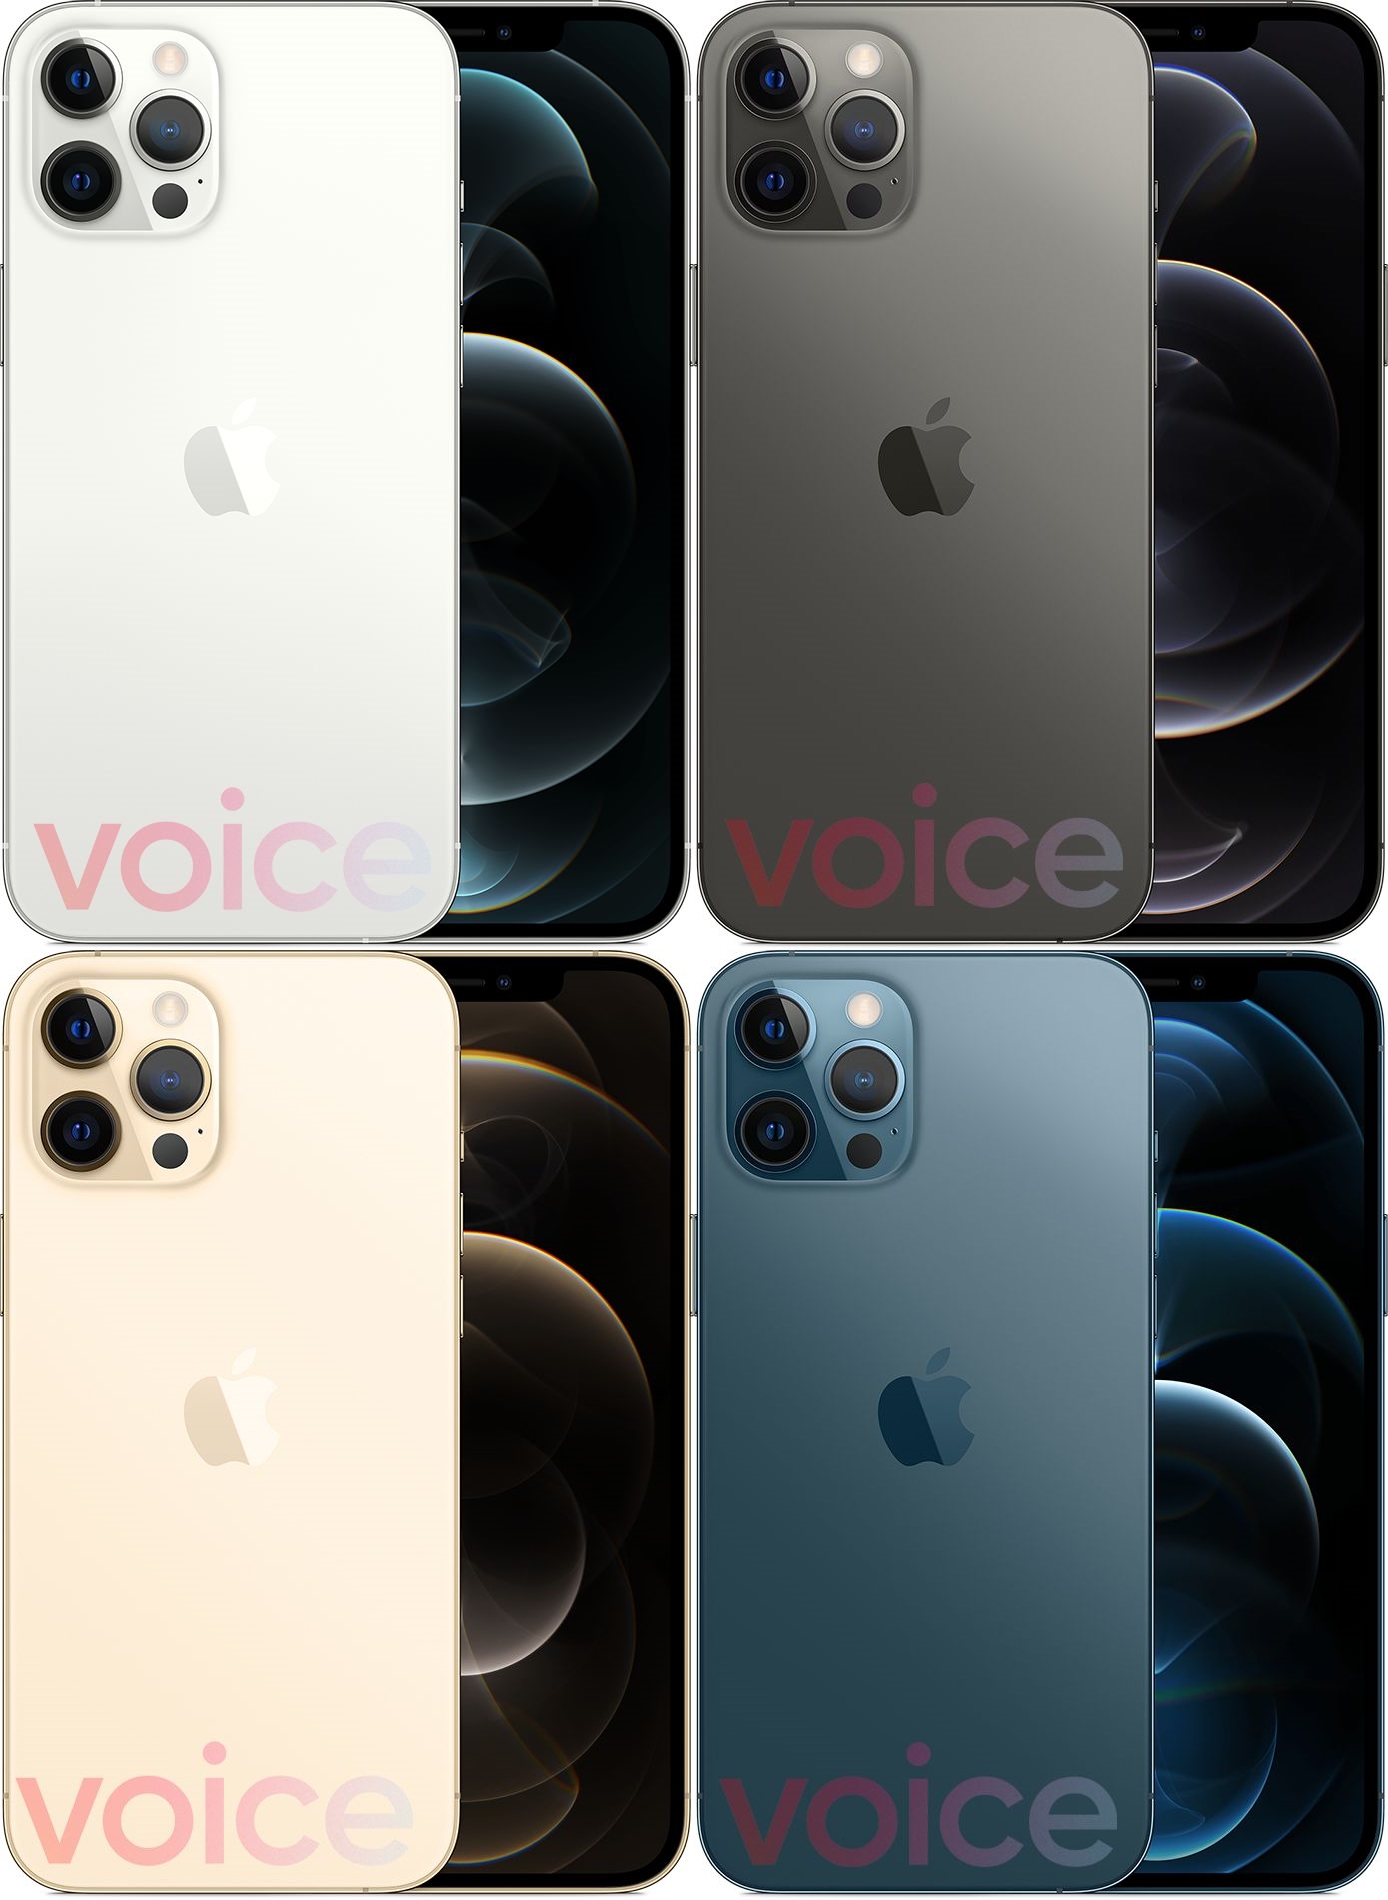 iphone 12 bleu or graphite or